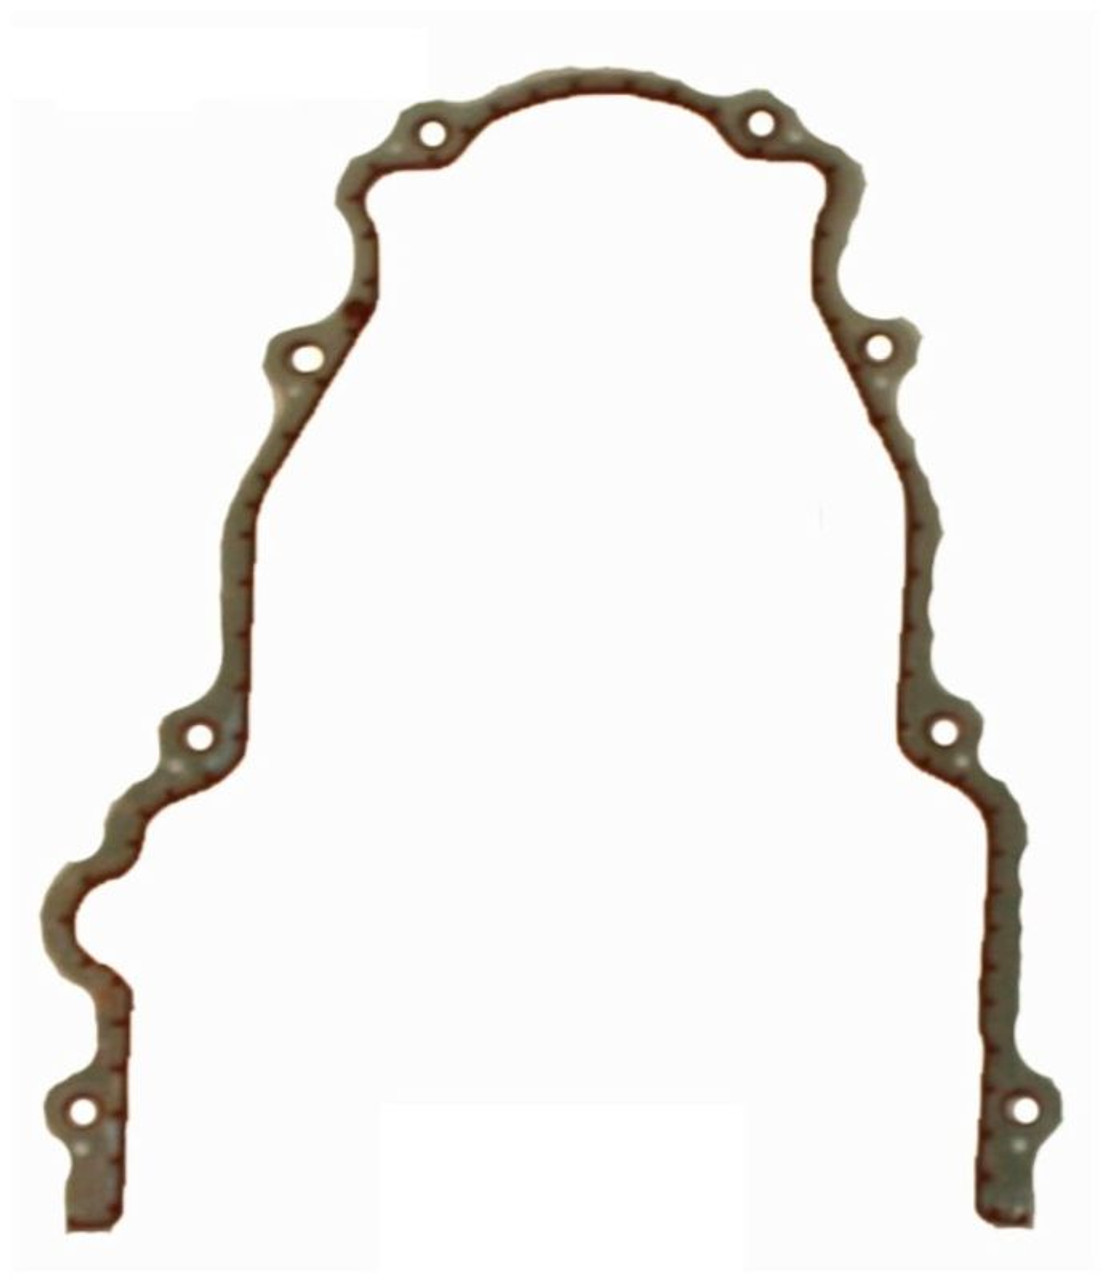 2006 Chevrolet Express 2500 6.0L Engine Timing Cover Gasket TCG293-A -322